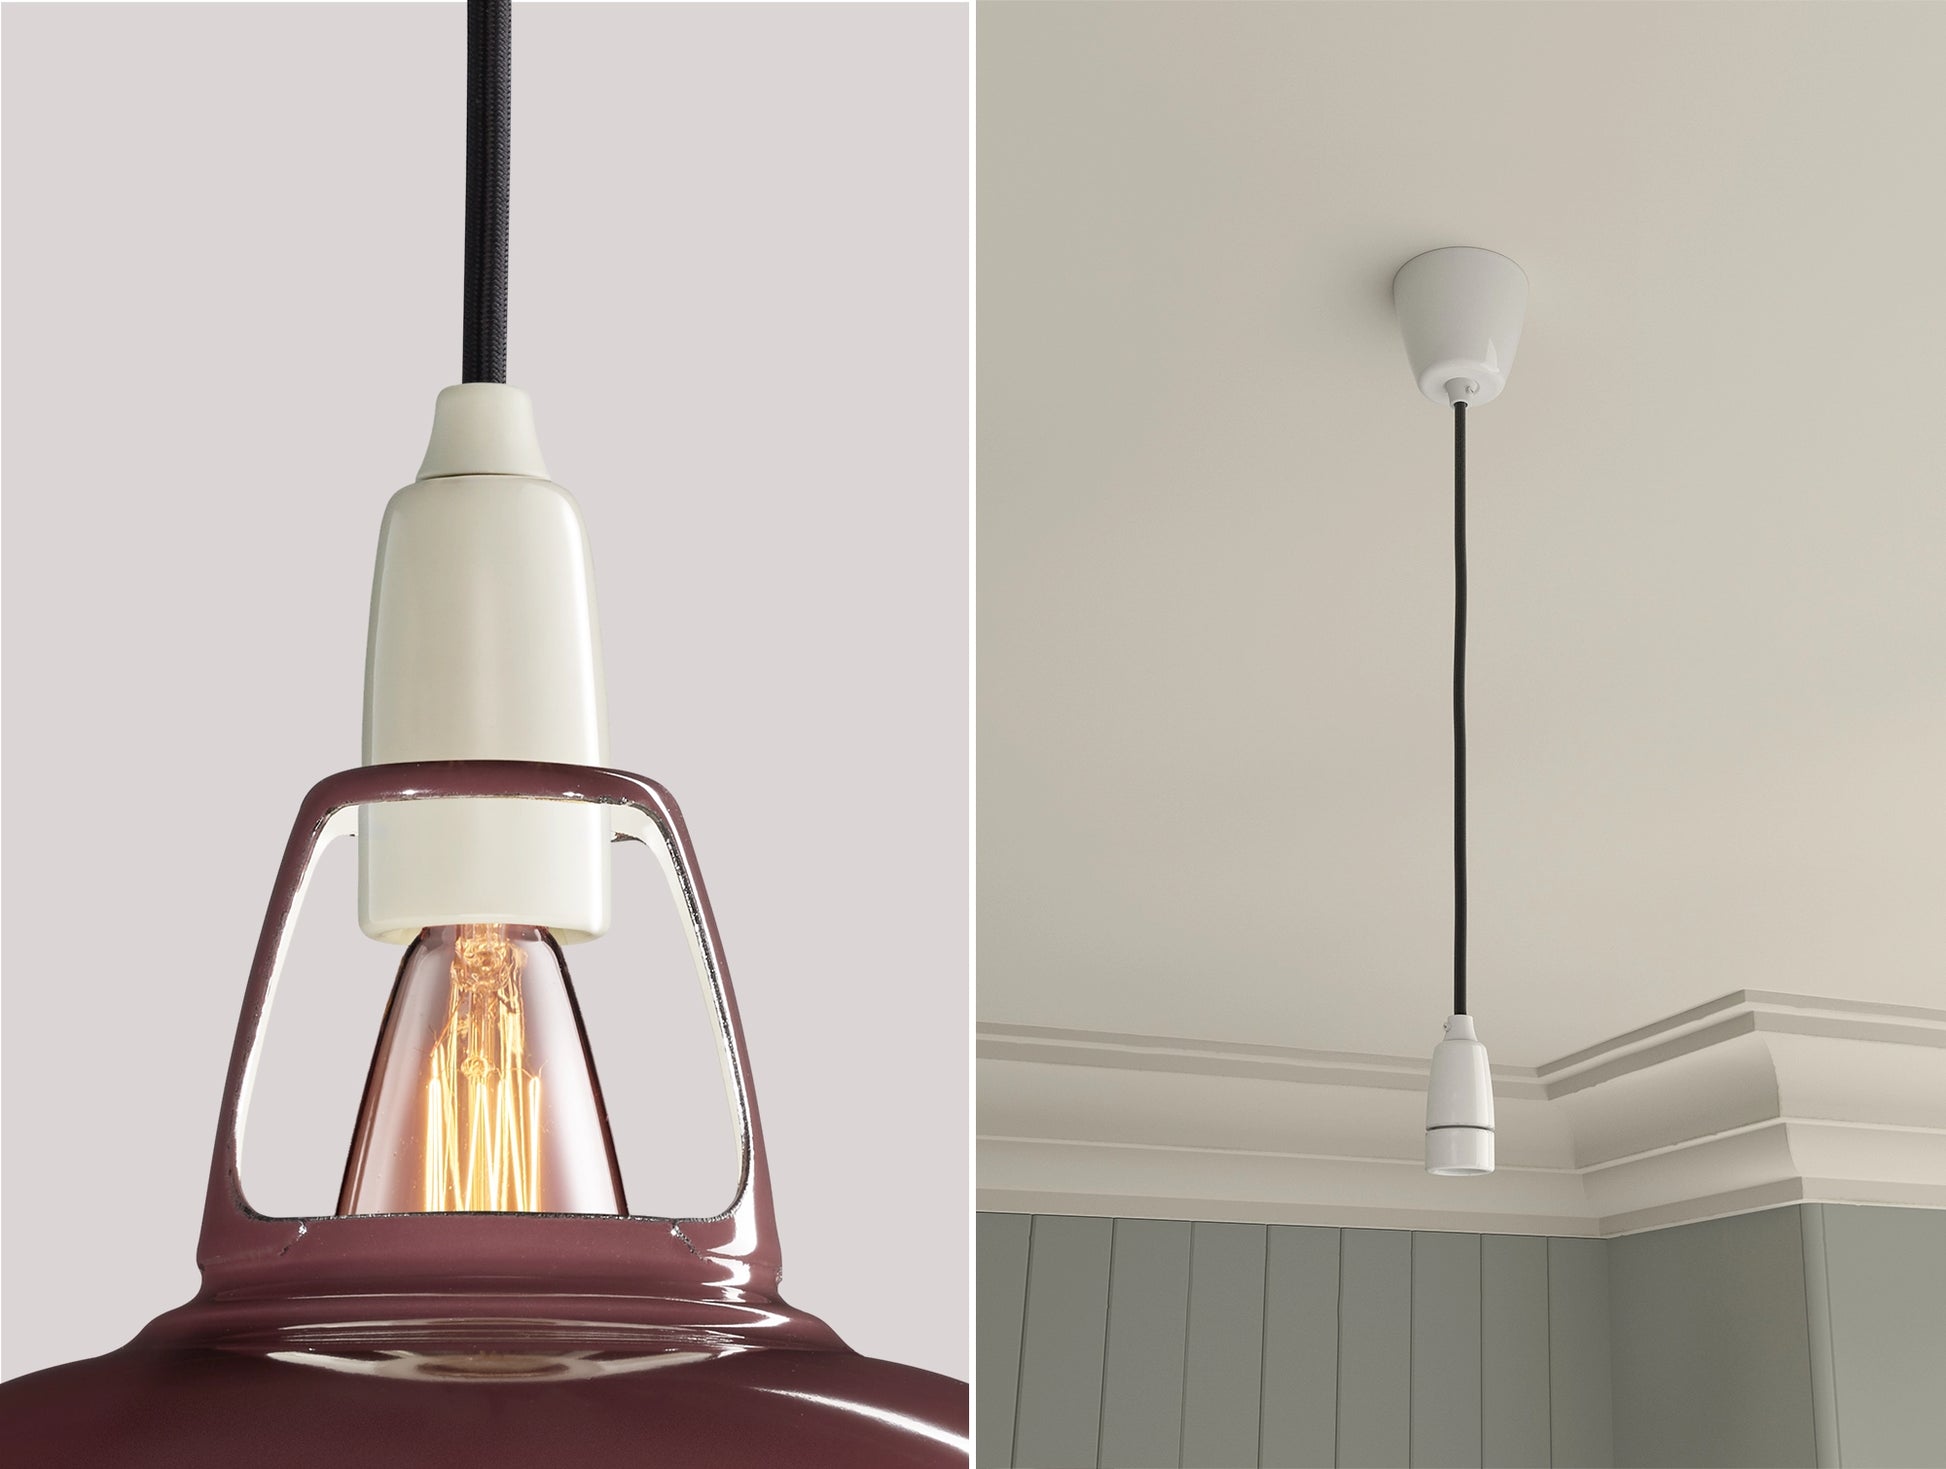 Close up of an E14 Porcelain suspension set on a Metropolitan lampshade on the left. On the right, an E14 Porcelain pendant set is hanging from the ceiling